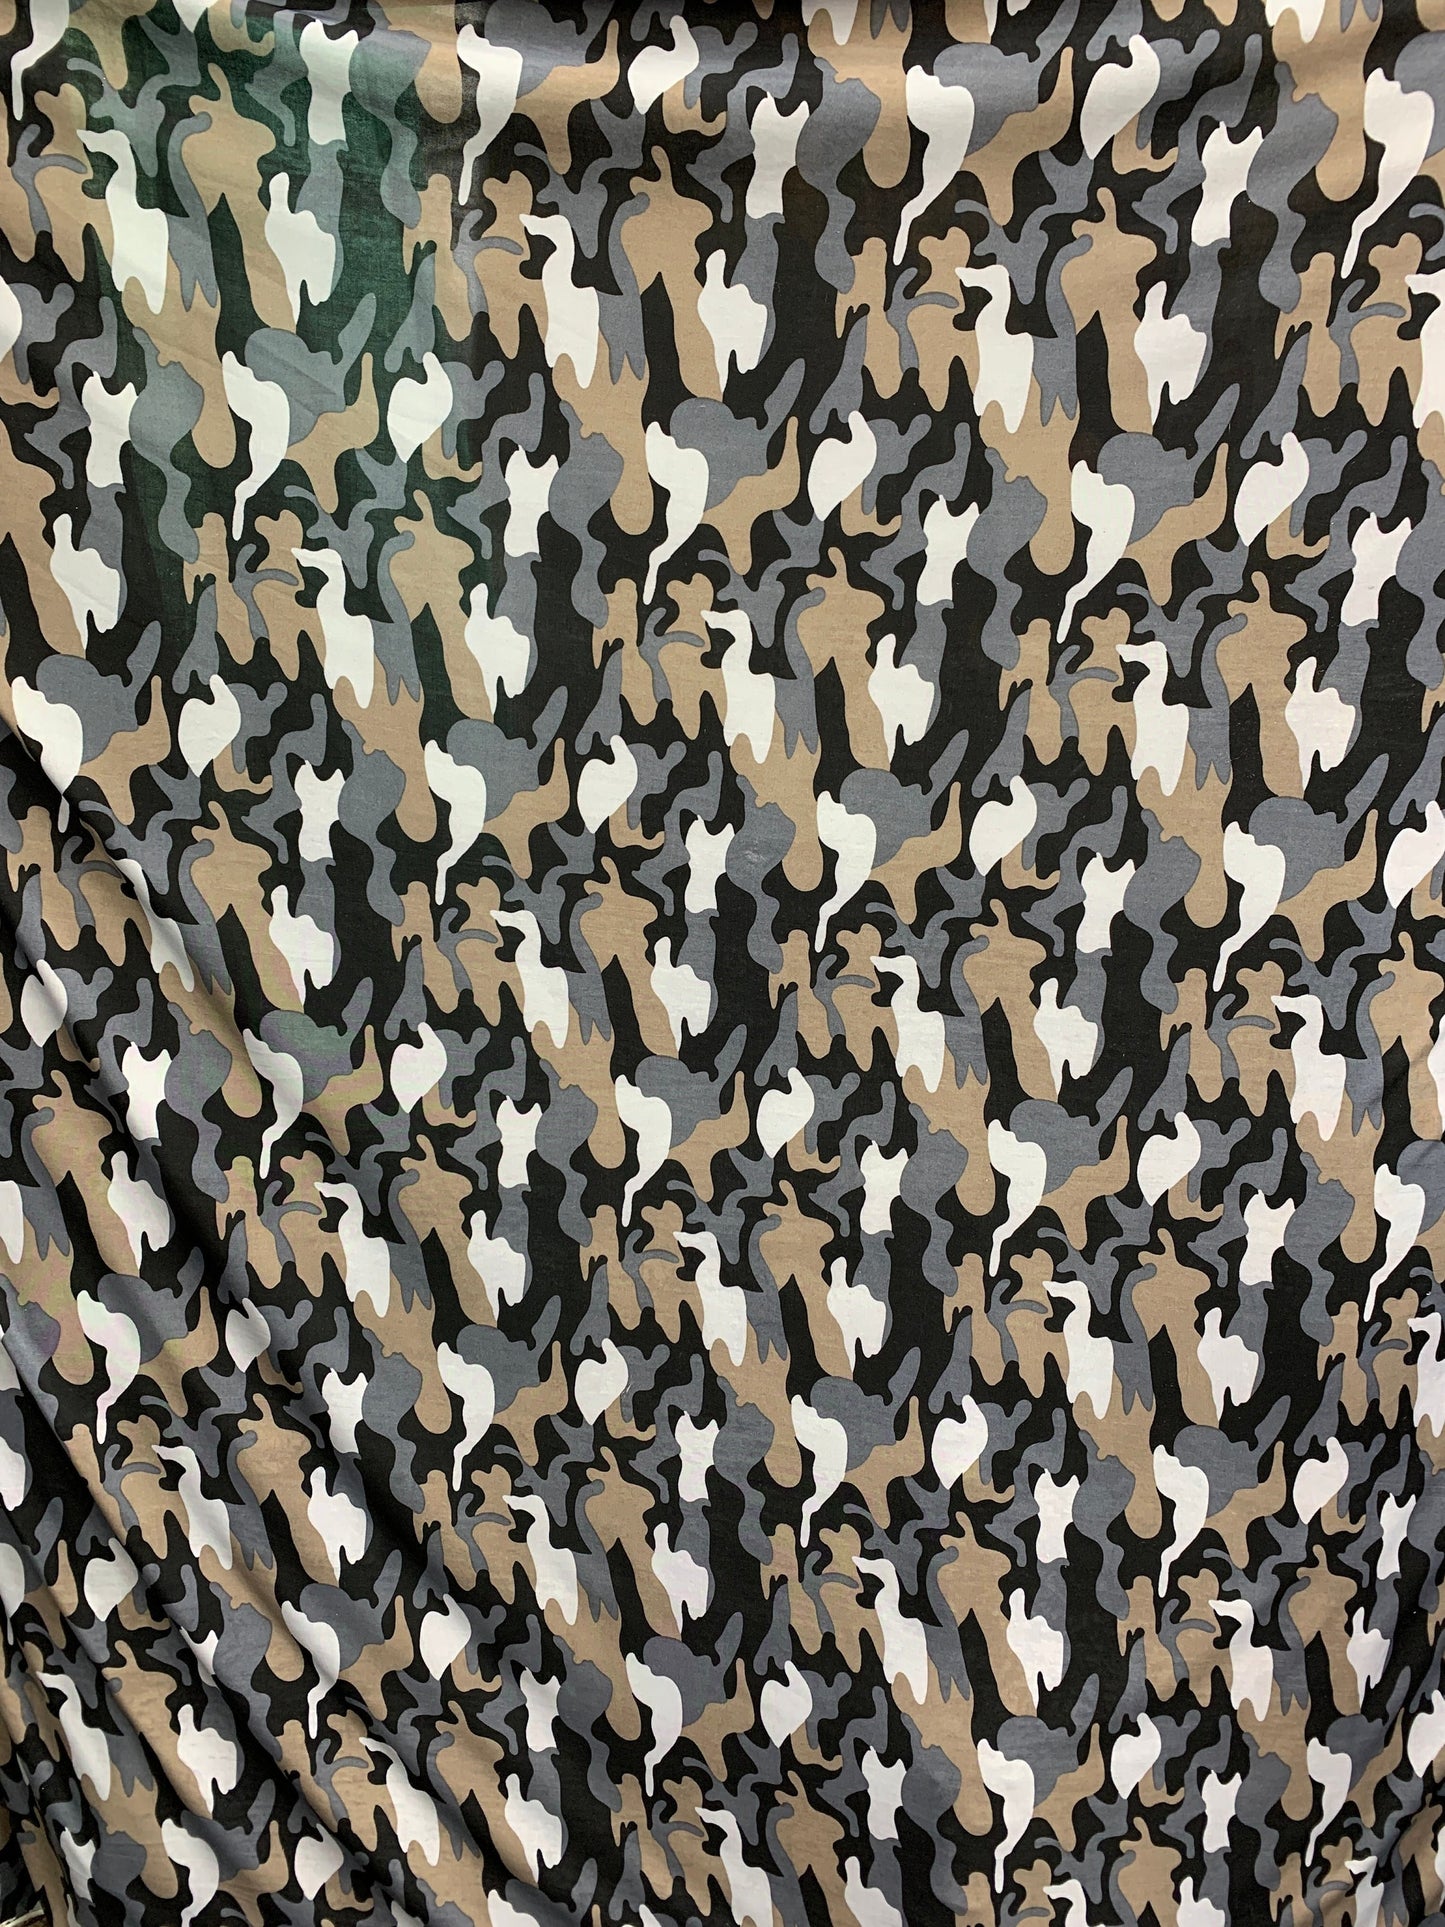 BEIGE GRAY Camouflage Print Cotton Jersey Stretch Fabric (60 in.) Sold By The Yard